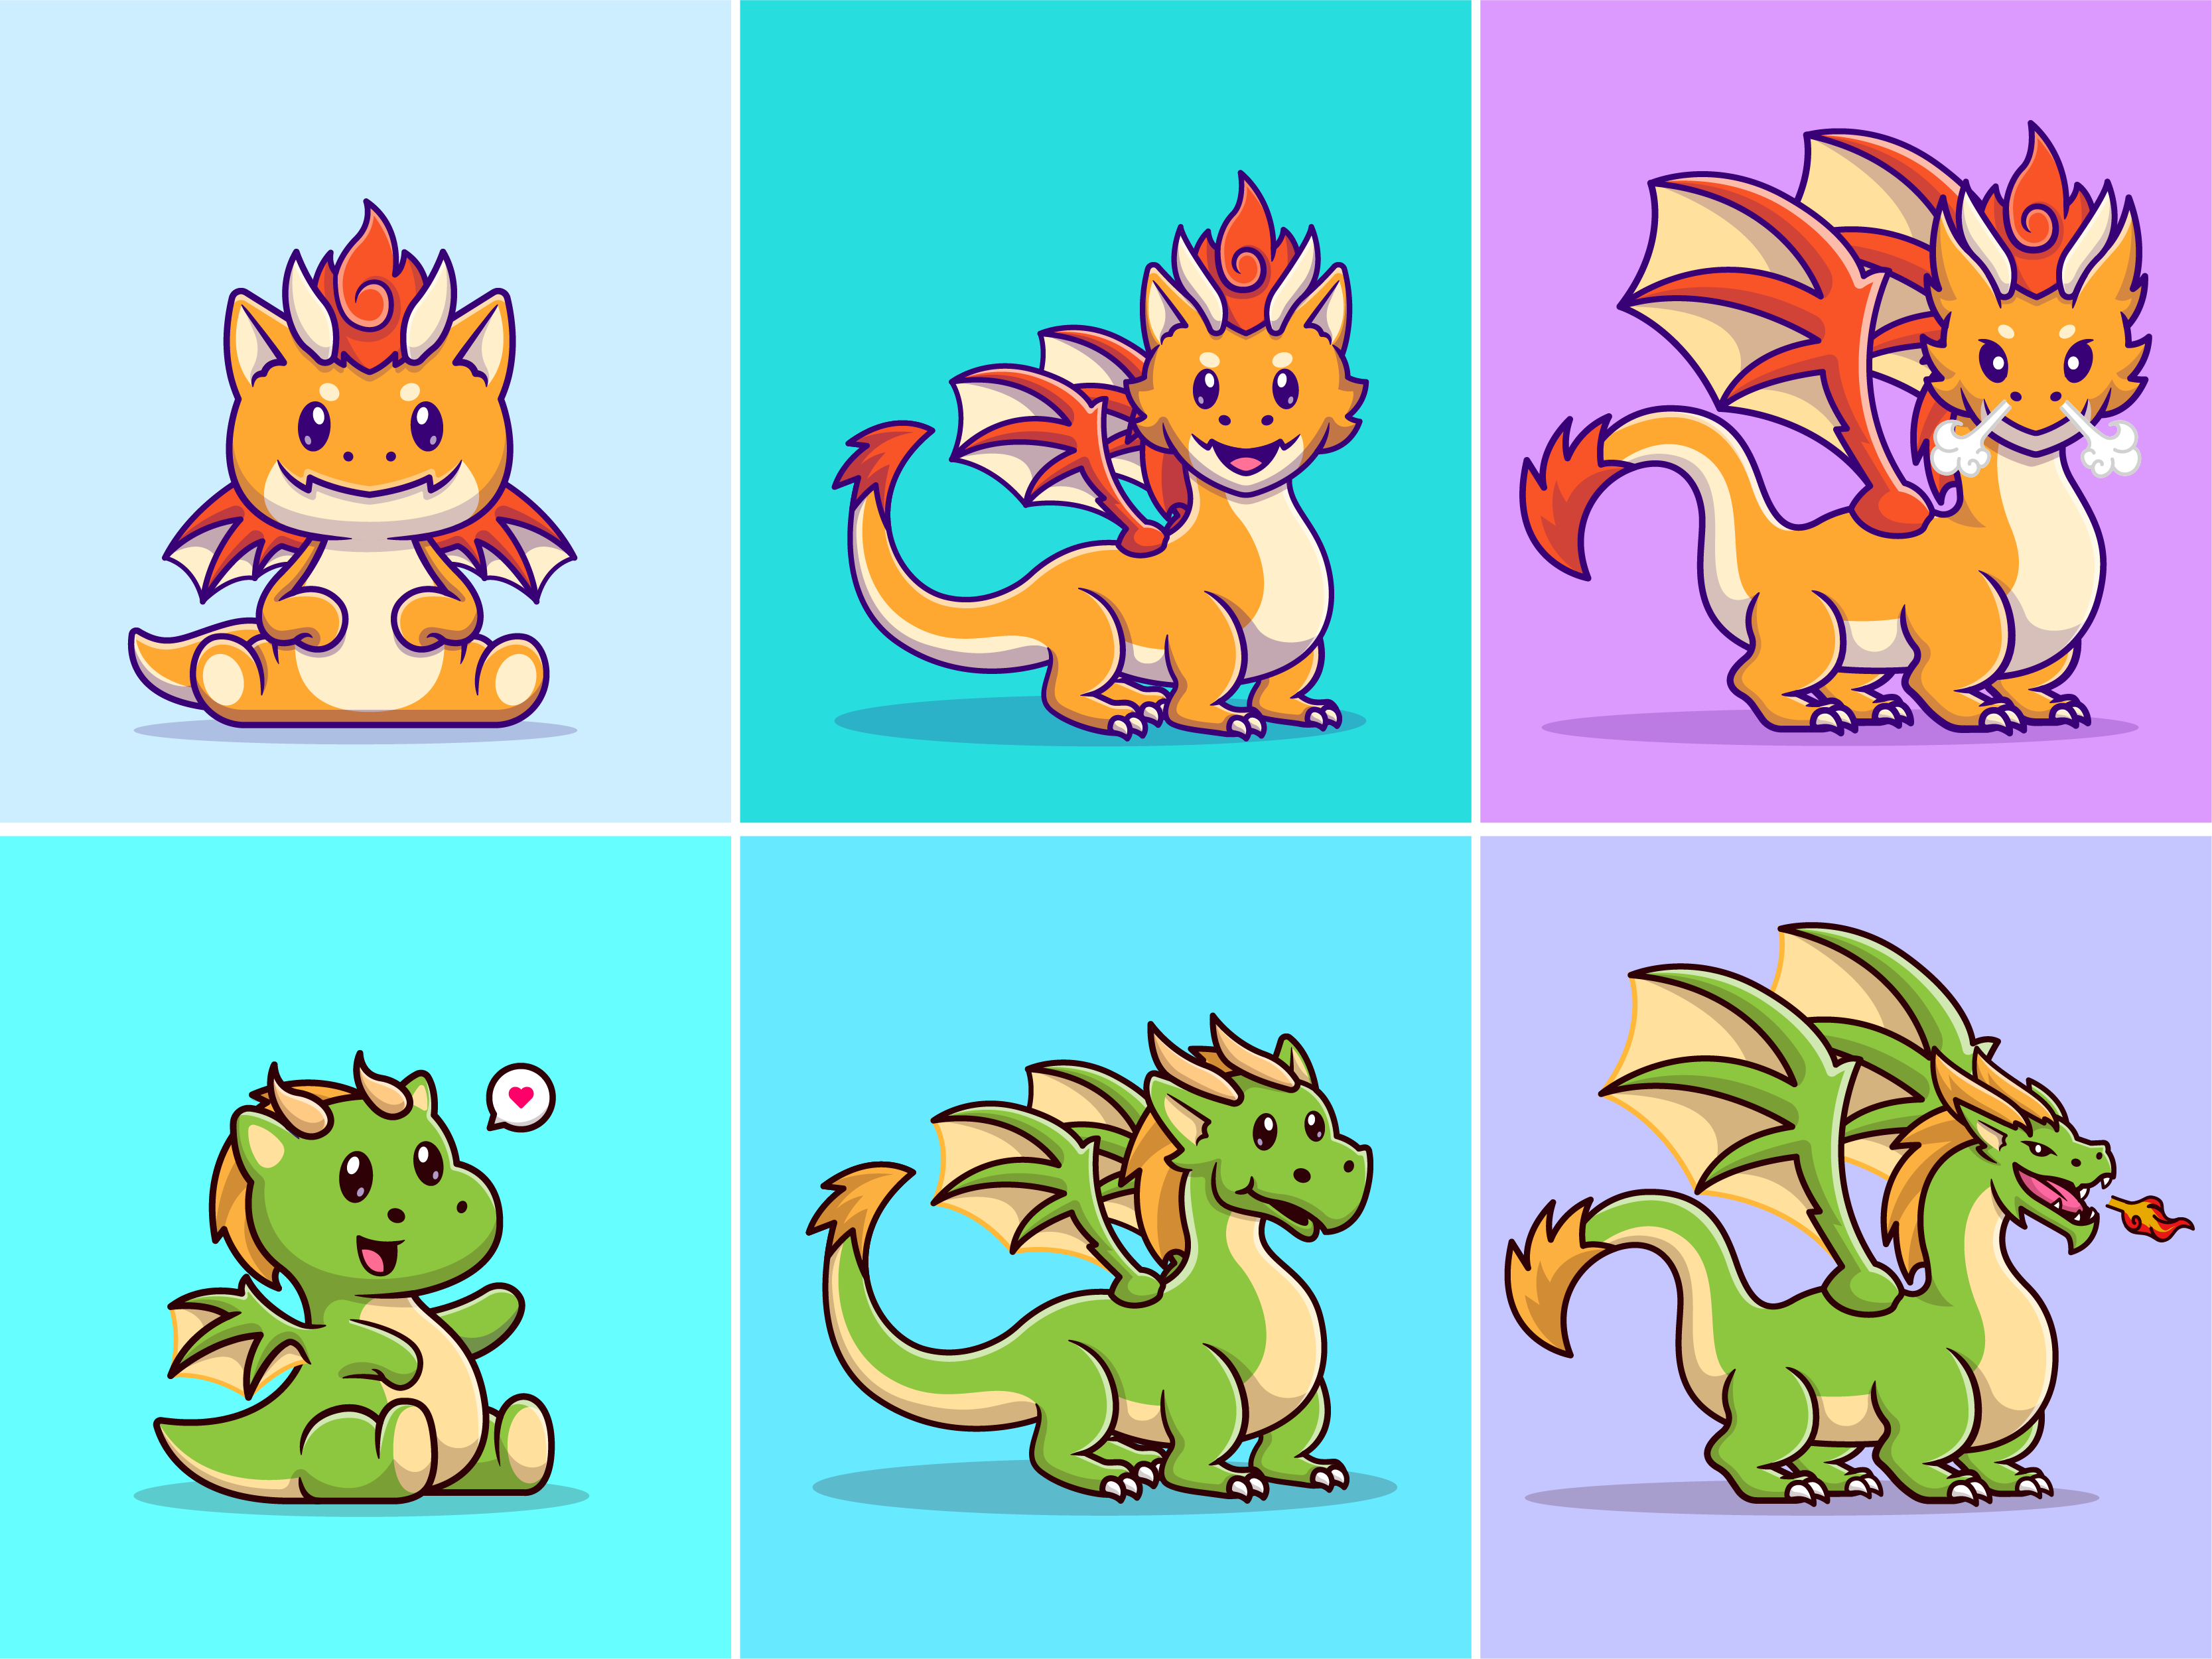 Dragon evolution???????????? by catalyst on Dribbble